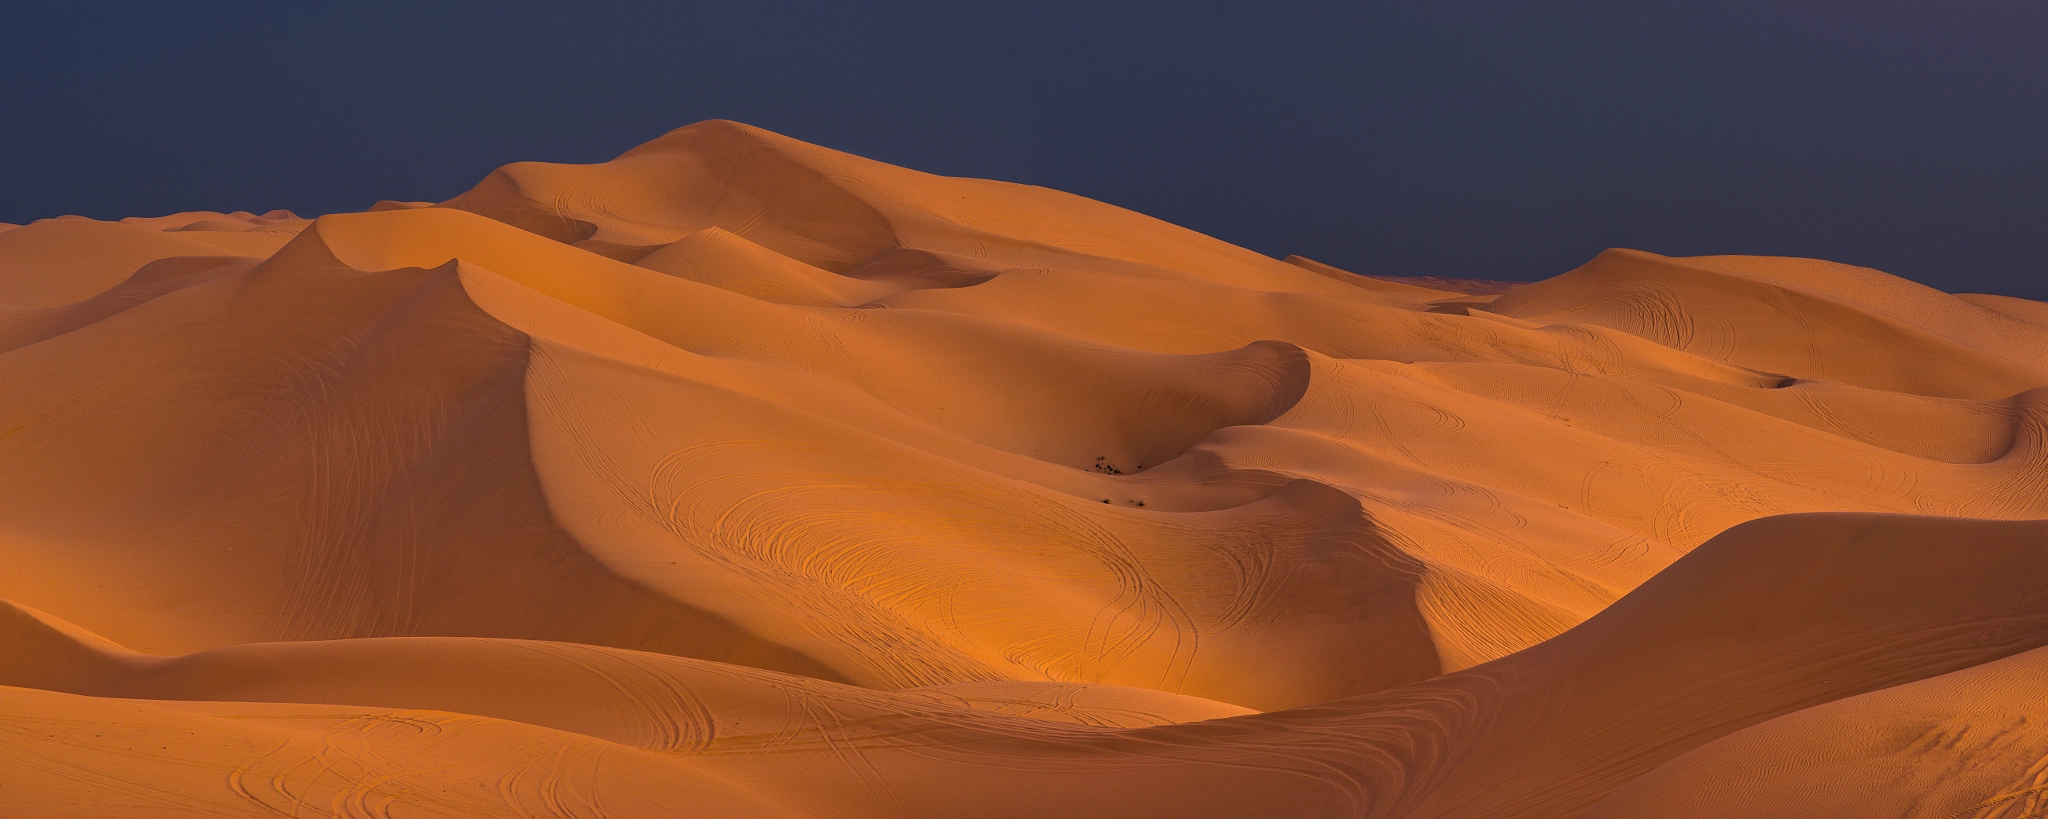 ZEISS Apo Sonnar T* 135mm F2 sample photo. Orange dune at dusk photography